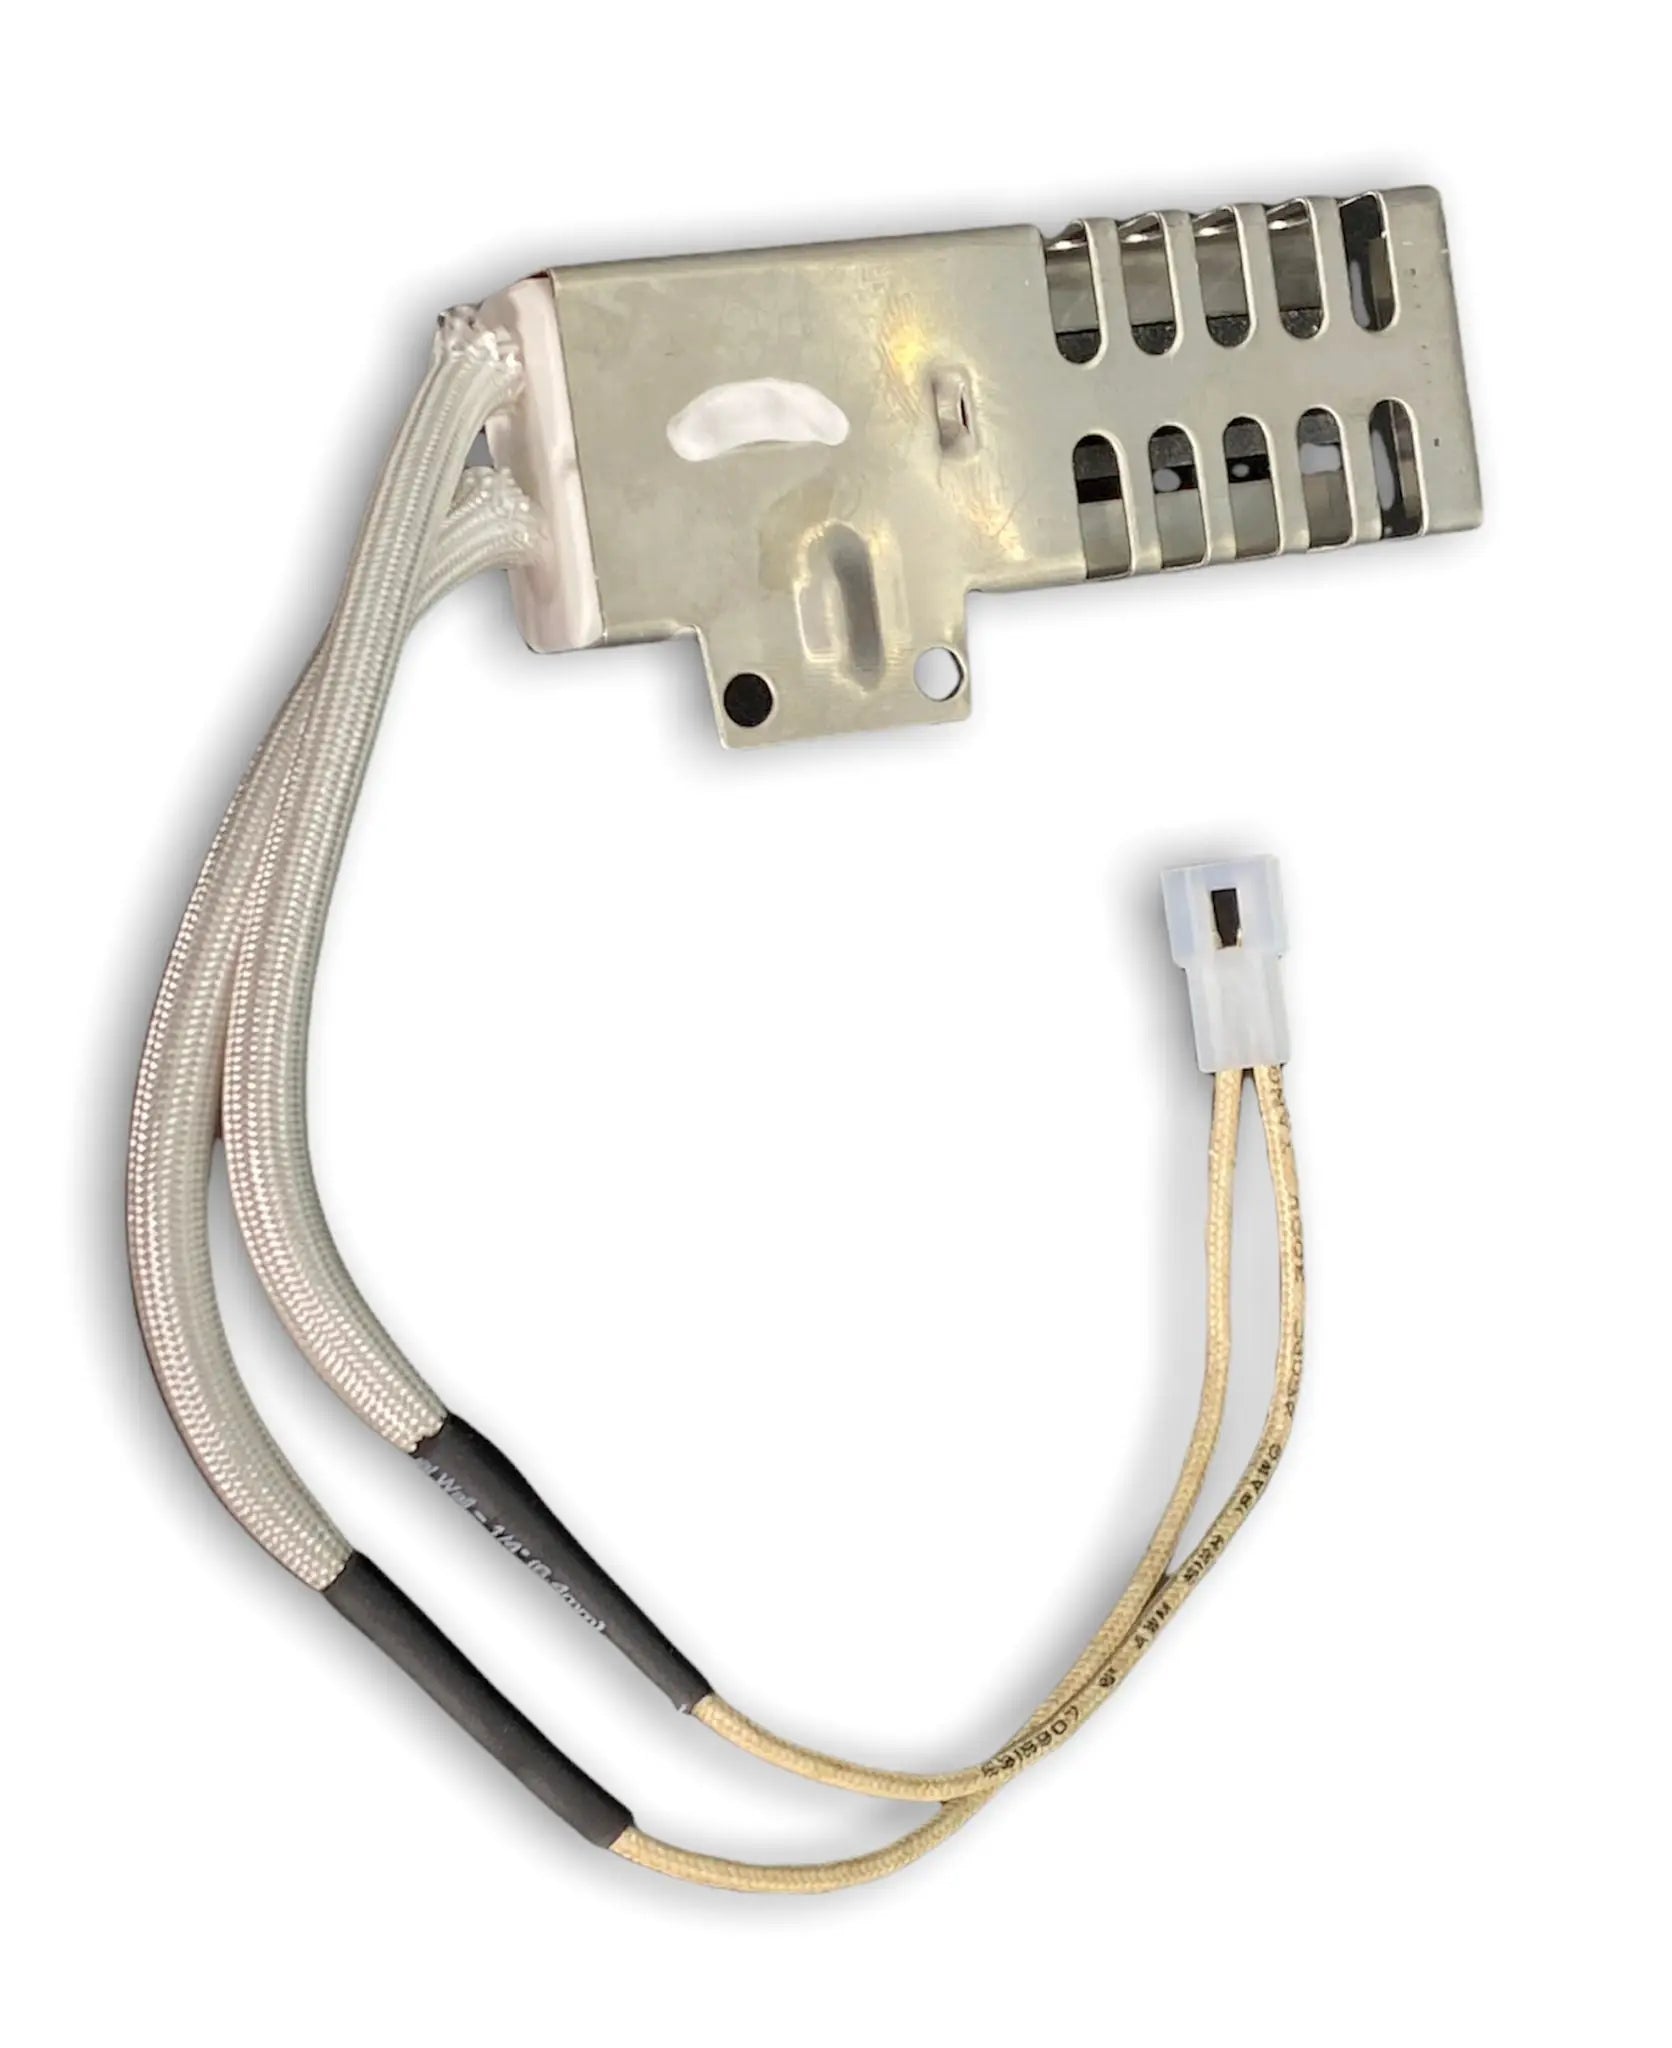 Whirlpool Range Flat Gas Igniter, Hot Surface  - WP3186491,  REPLACES: 3186491 503012 AP6007756 PS11740875 EAP11740875 PD00003723 INVERTEC